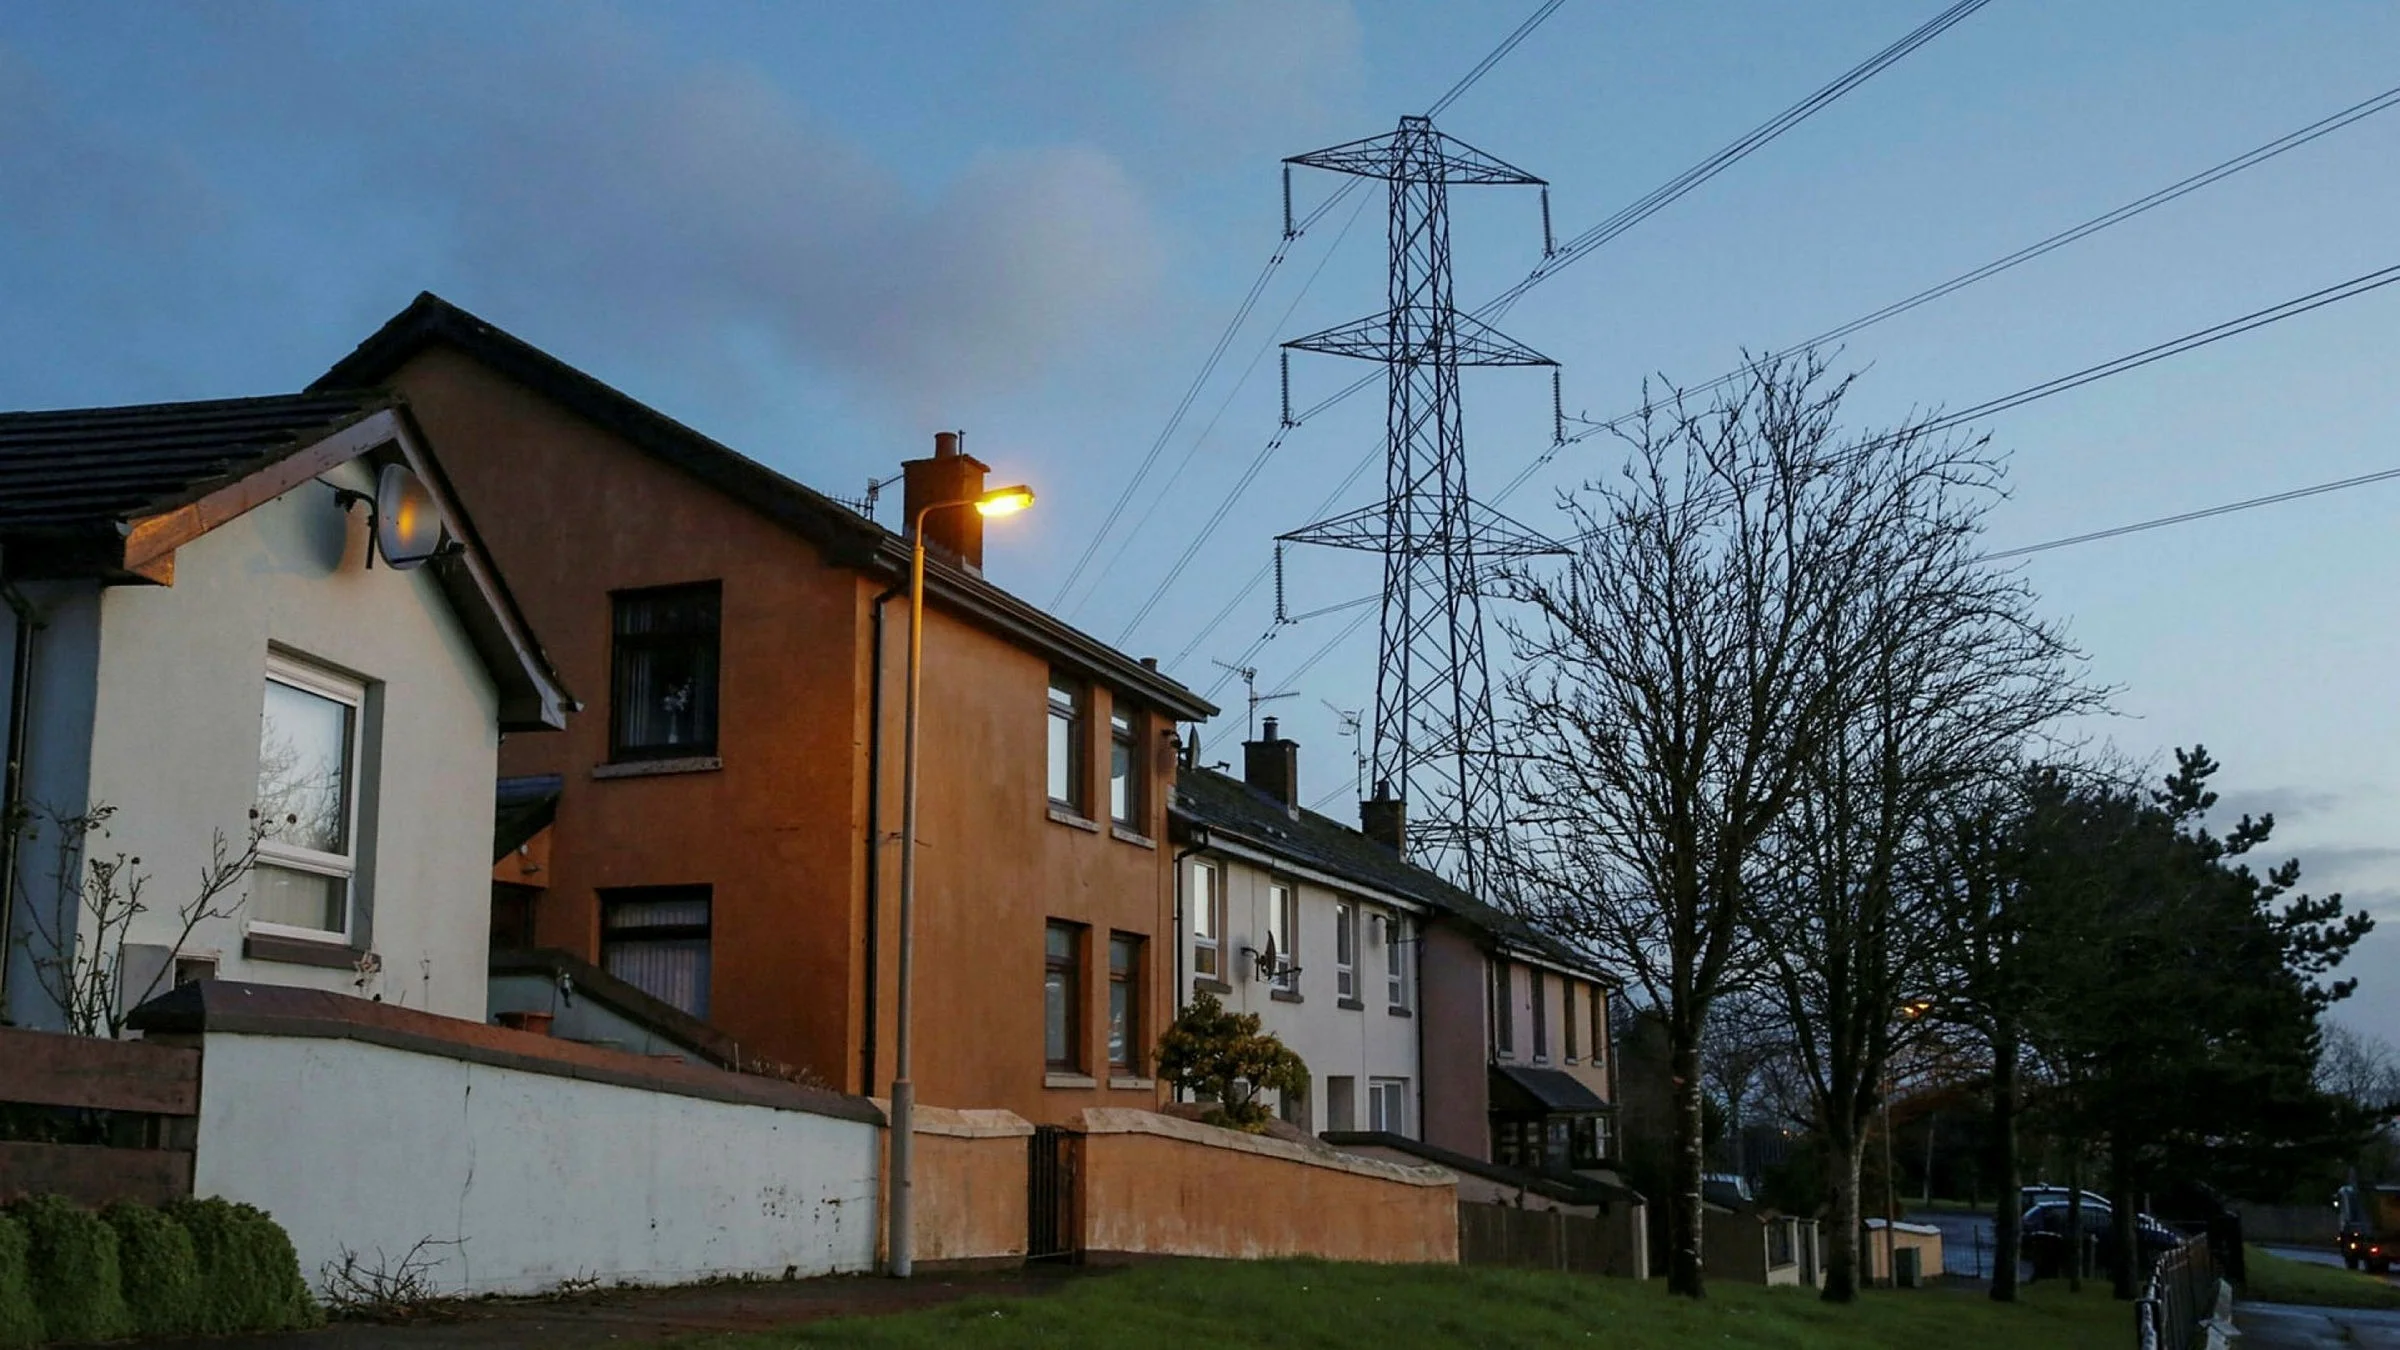 In October, energy prices for British homes are expected to increase by 80 percent.